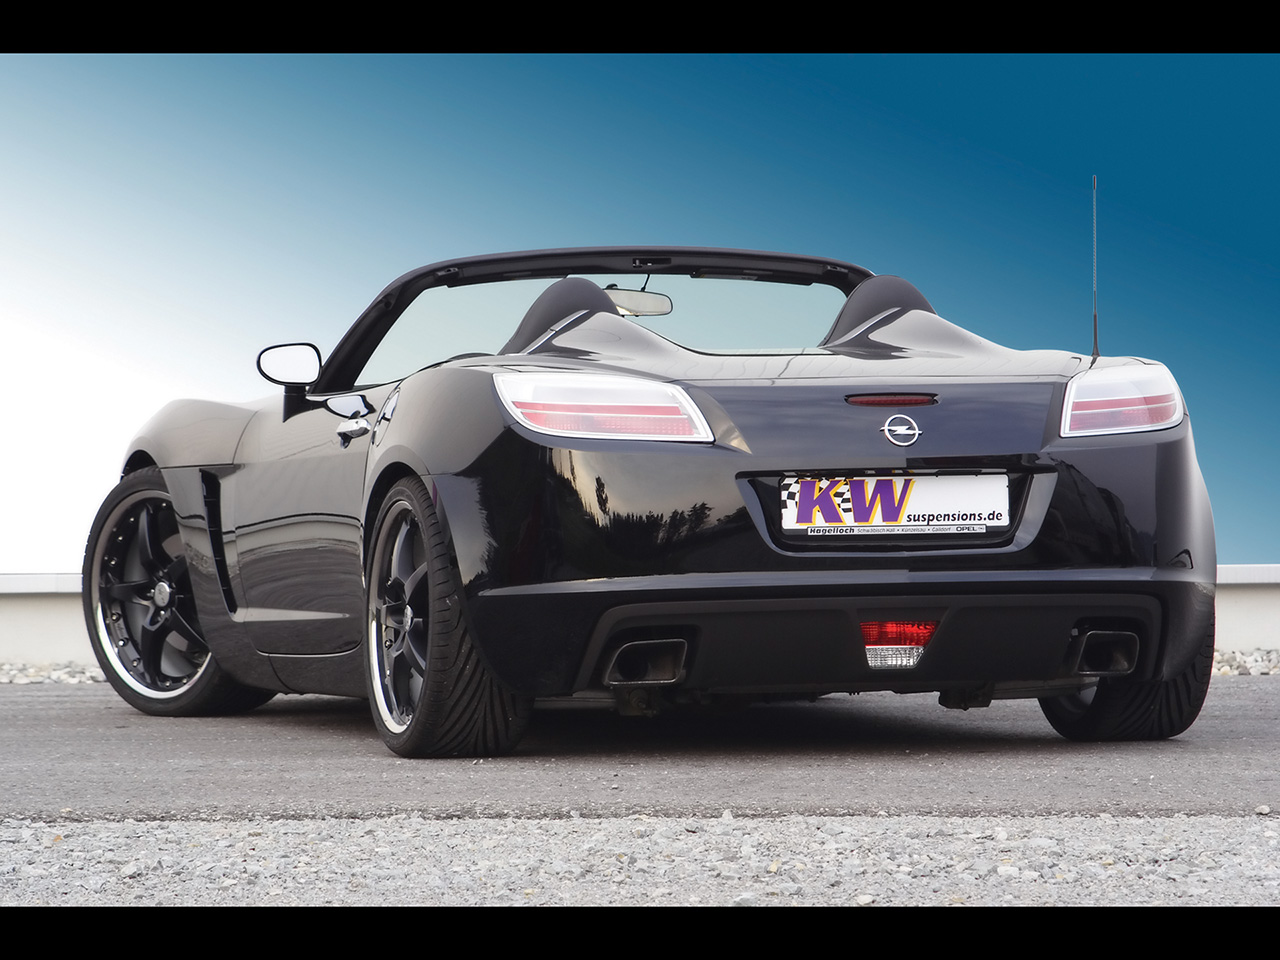 2007 Opel Gt With Kw Coilover Suspension photos and wallpapers